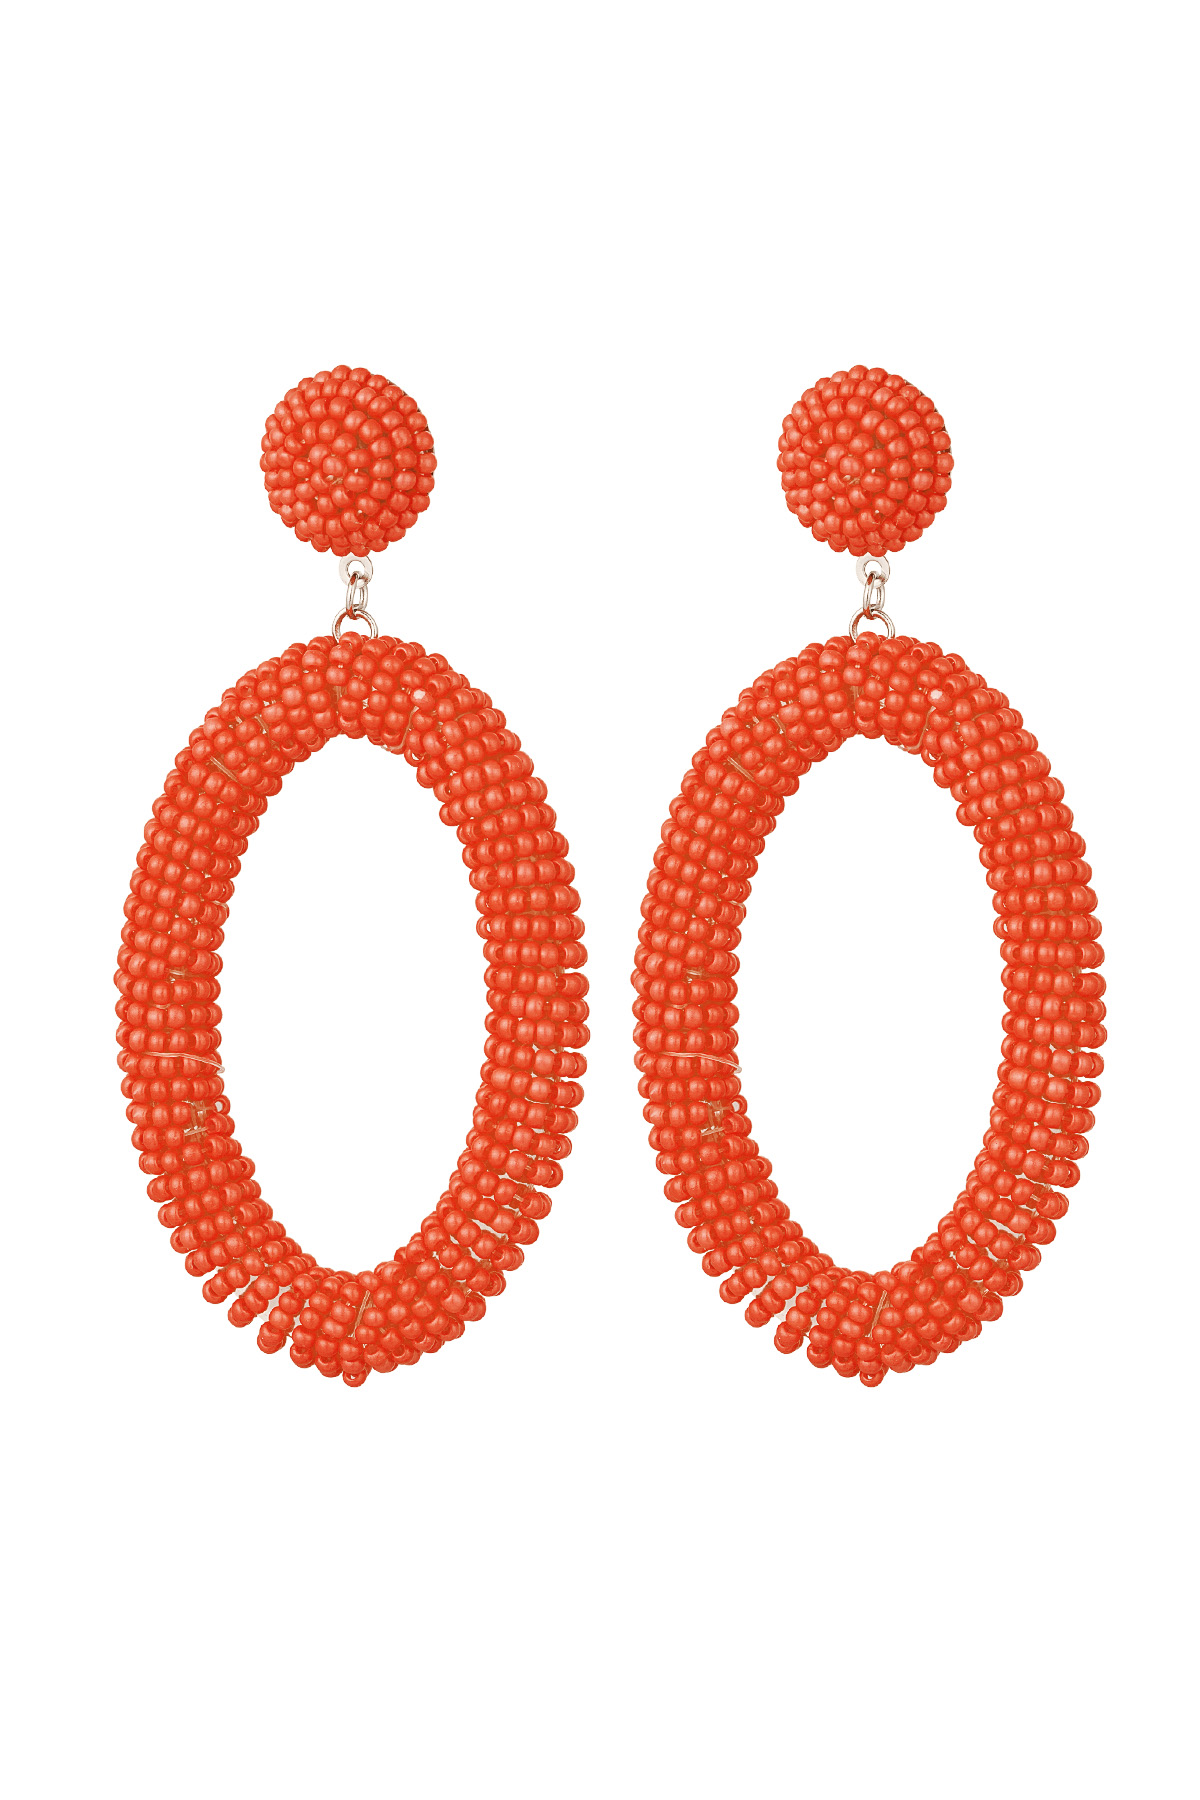 Earrings beads candy elongated - orange Stainless Steel h5 